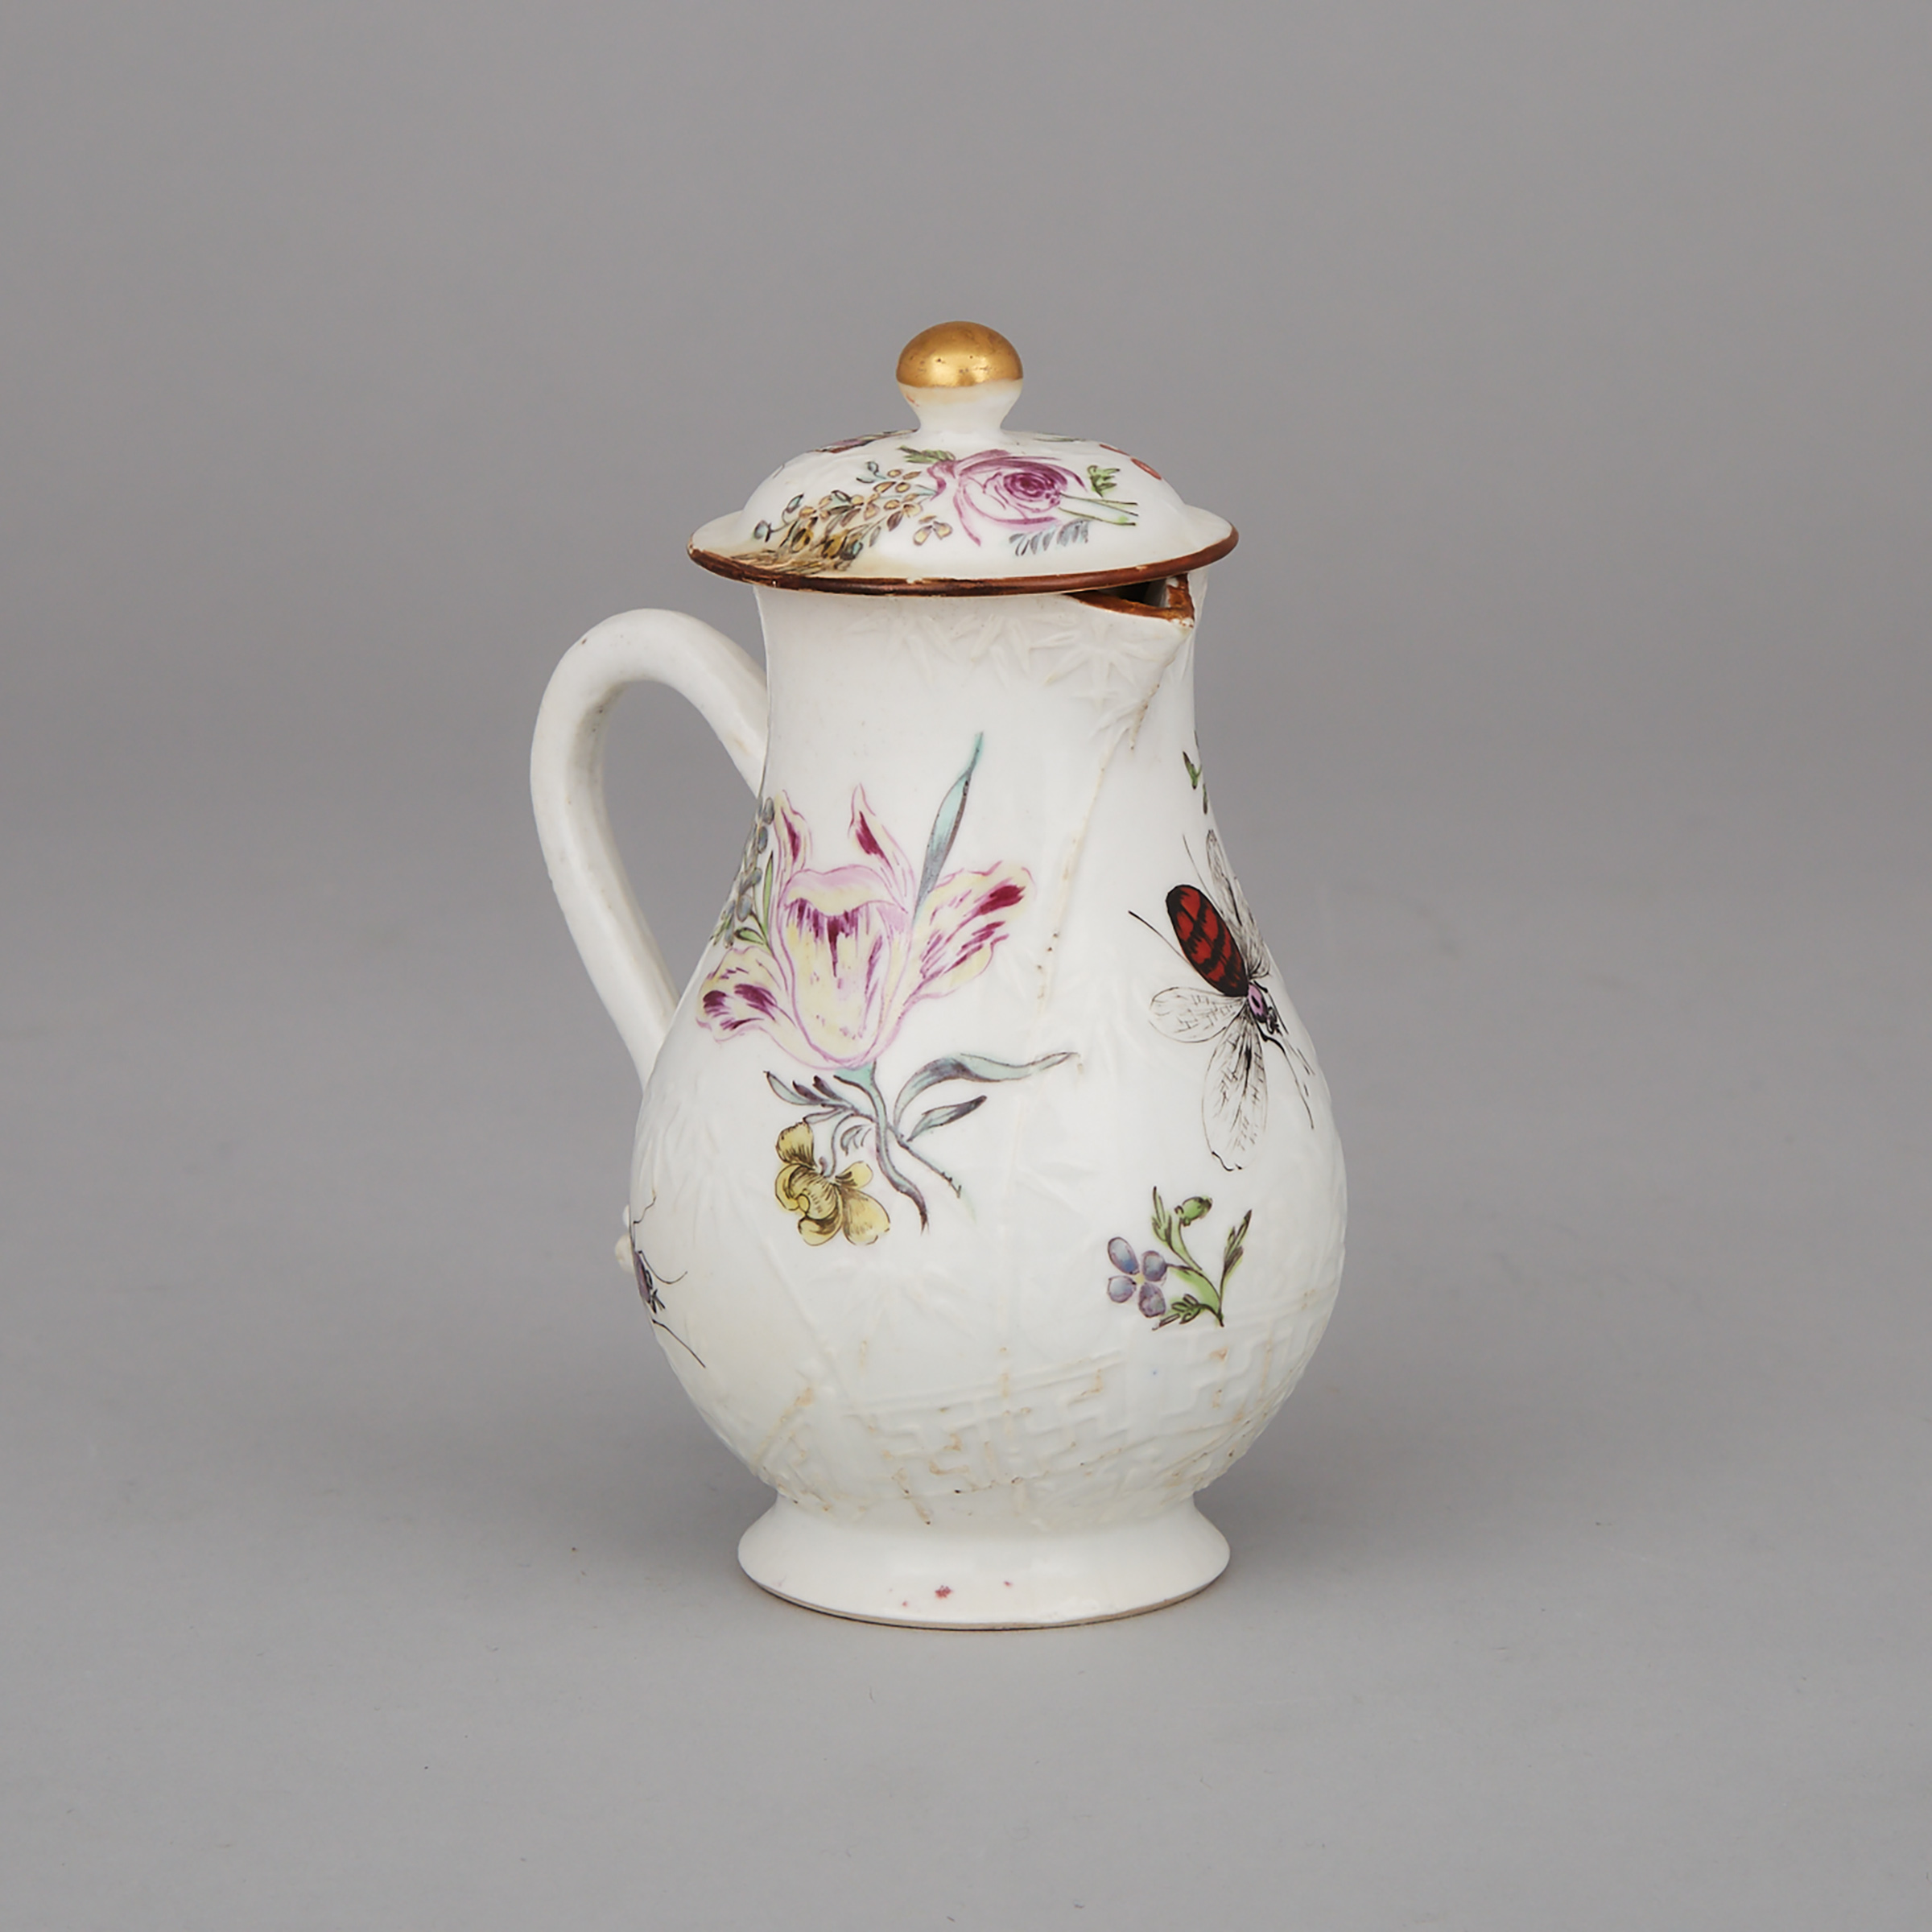 Chinese Export Porcelain Covered Cream Jug, c.1760